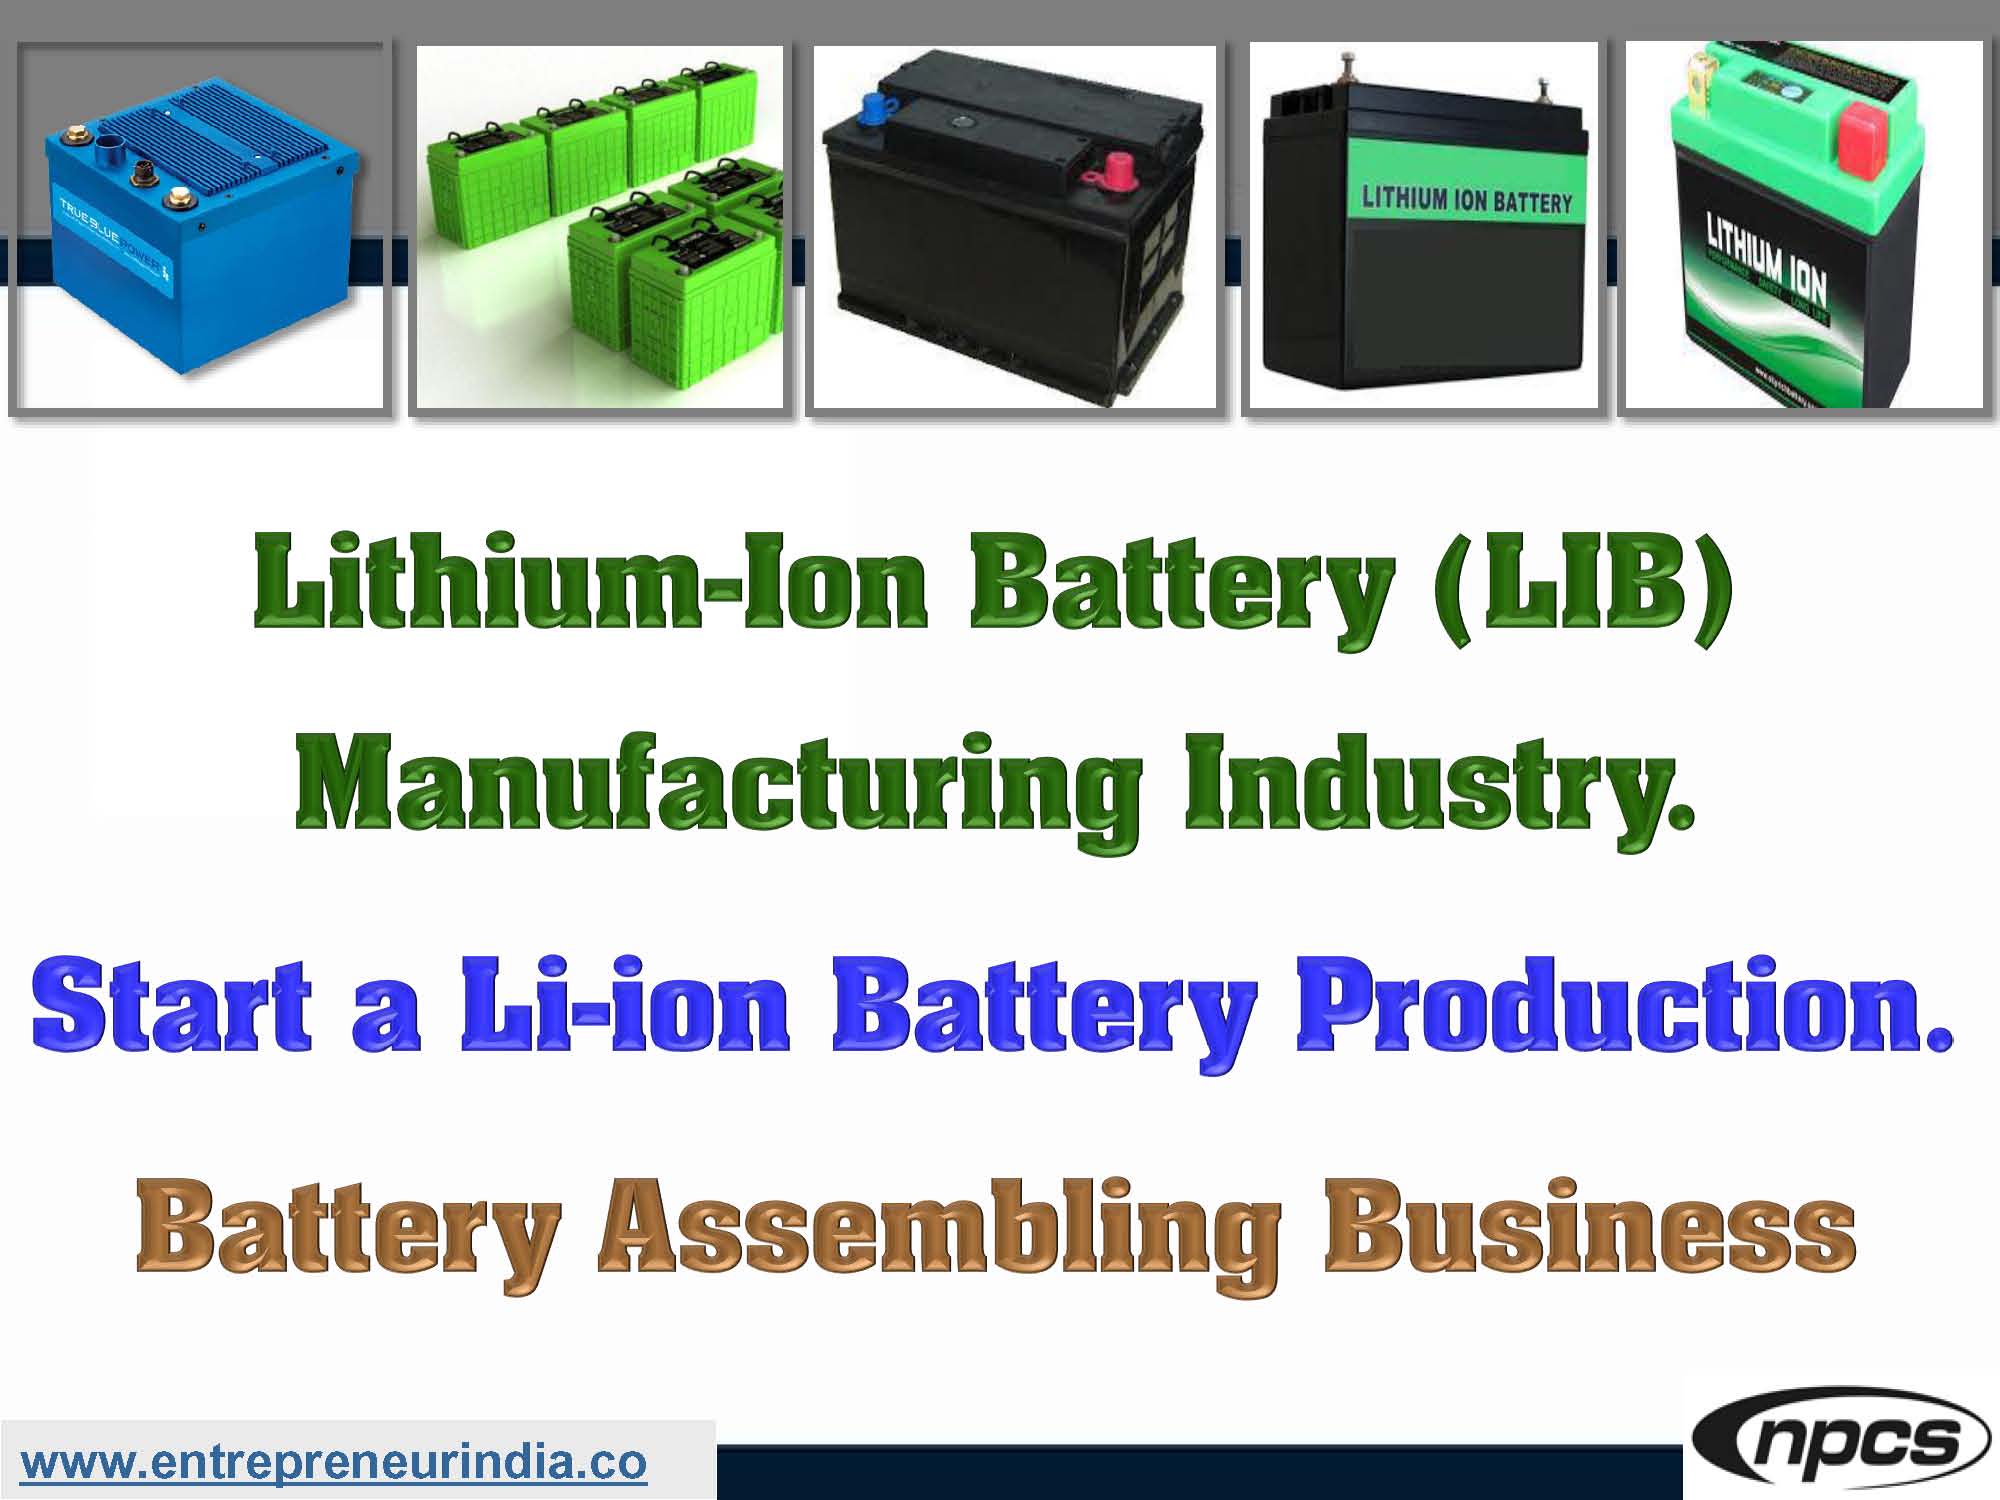 Lithium-Ion Battery (LIB) Manufacturing Industry